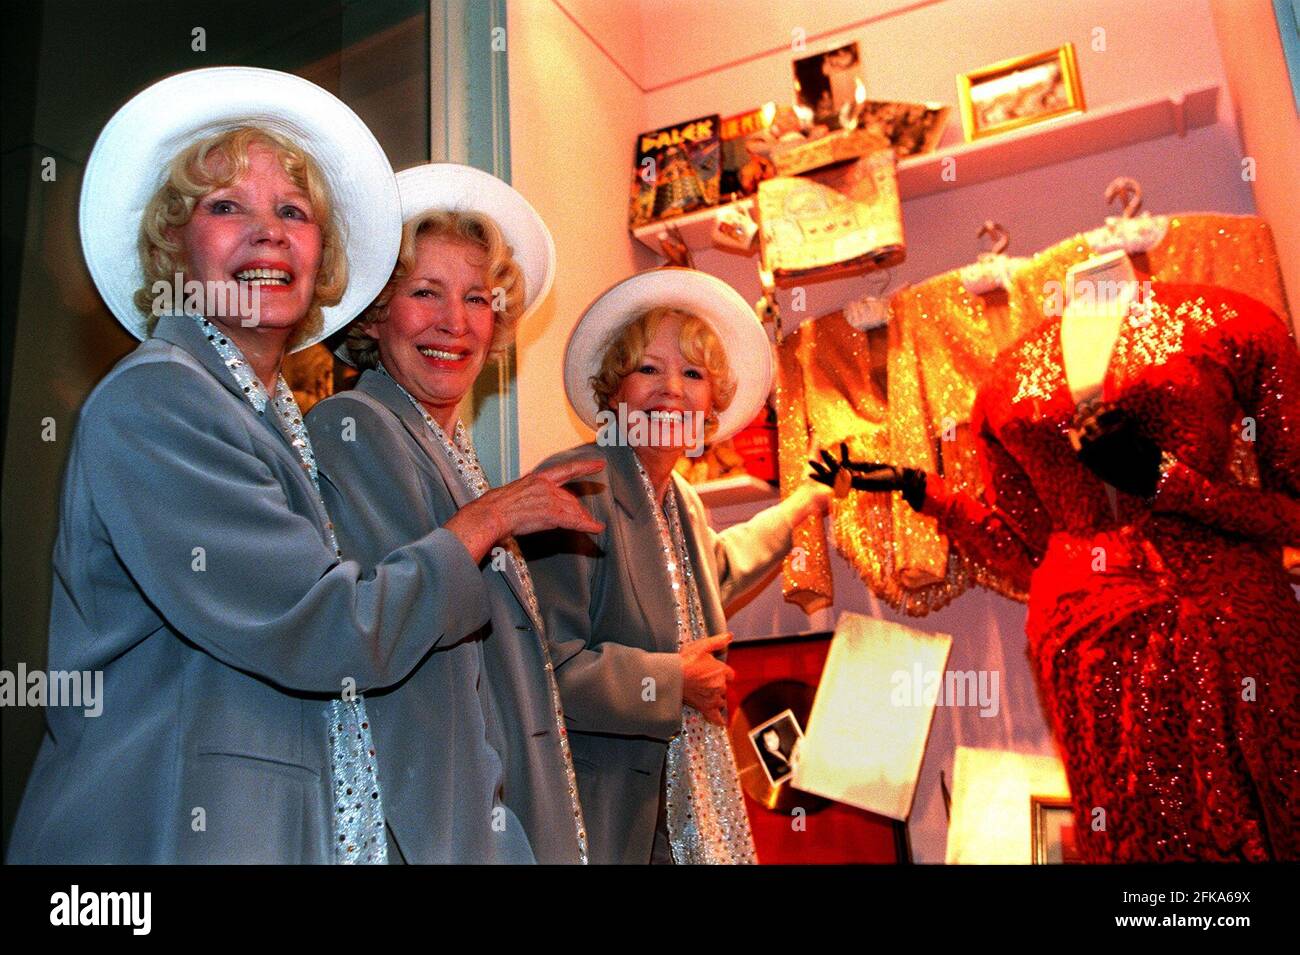 The Beverley Sisiter March 1999at the Imperial War Museum  with one of the exhibits  From the Bomb to the Beatles exhibition containing costumes and dress worn by Marilyn Monroe in the film  Gentleman perfer Blondes Stock Photo